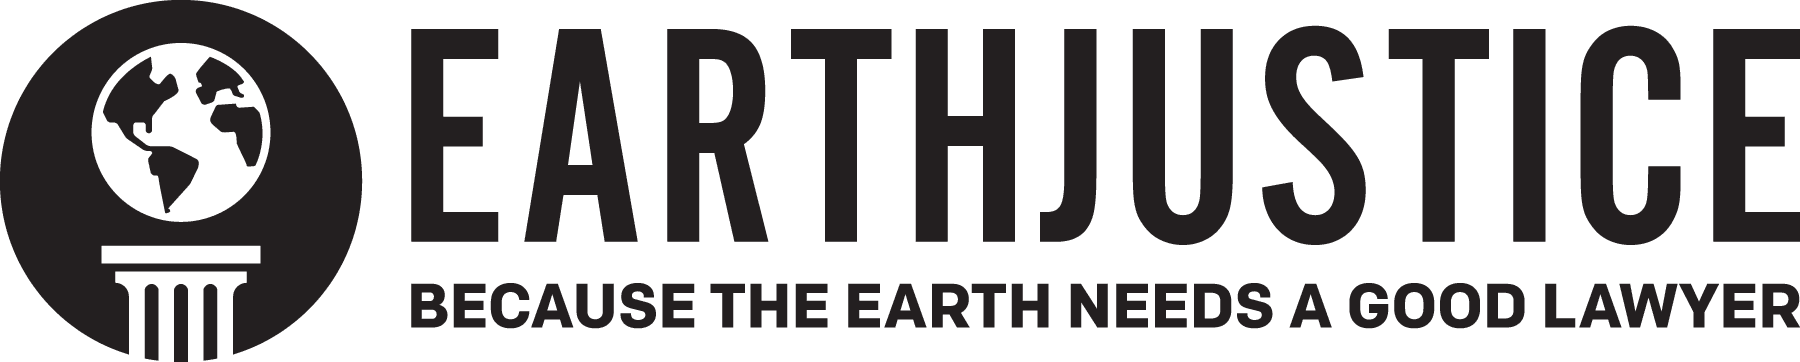 Earthjustice - Because the earth needs a good lawyer